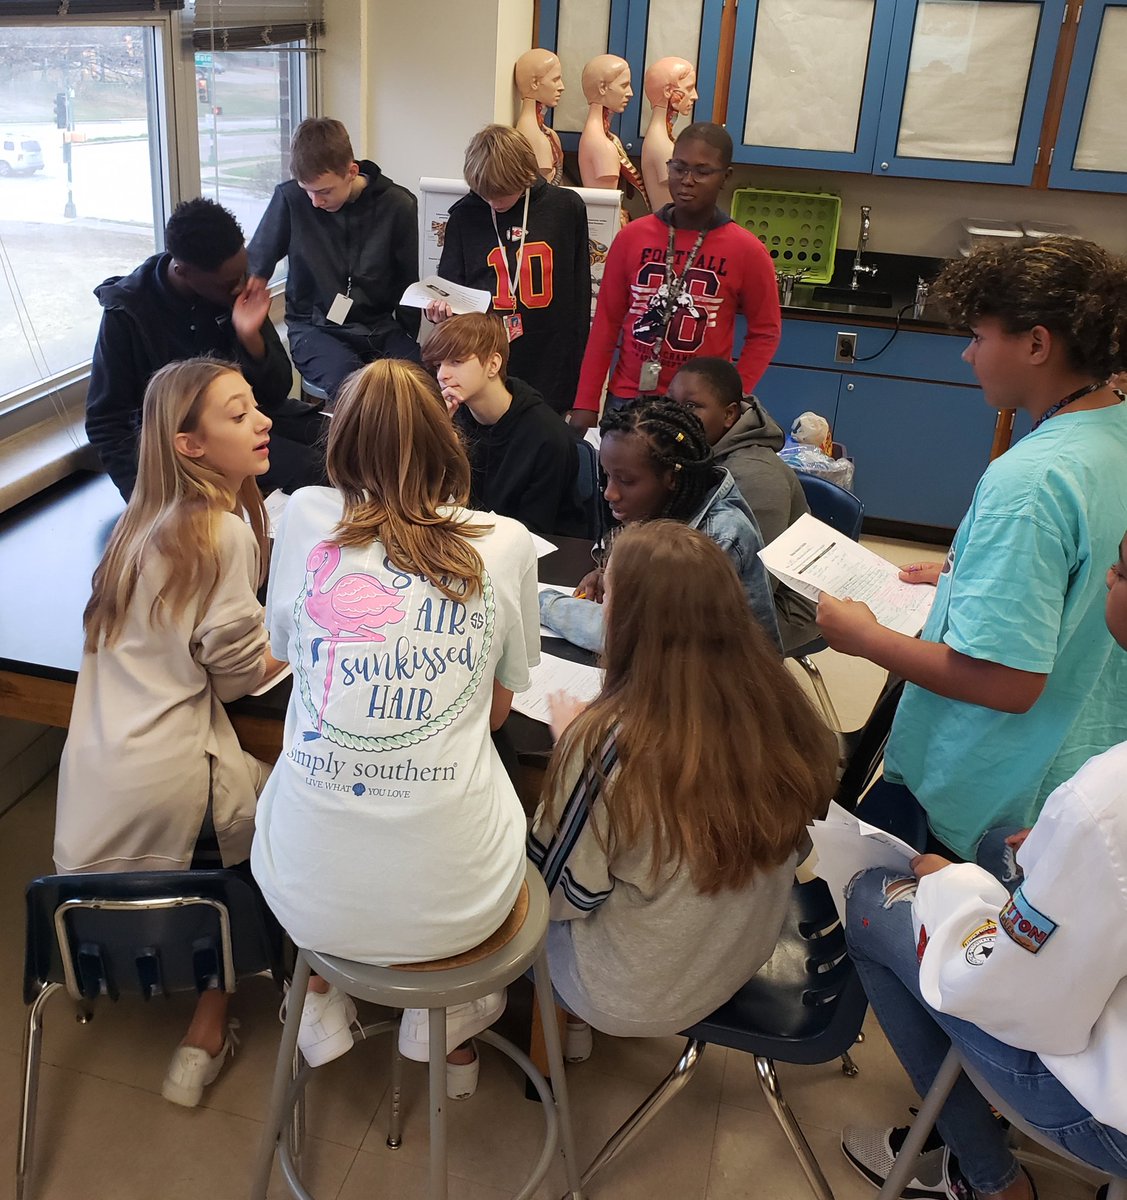 My kids are meeting with their teams to finalize plans for tomorrow's Great Debate over the use of GMOs in our food supply. #teamLHJH #RISDsaysomething #adaptations #selectivebreeding #Question4